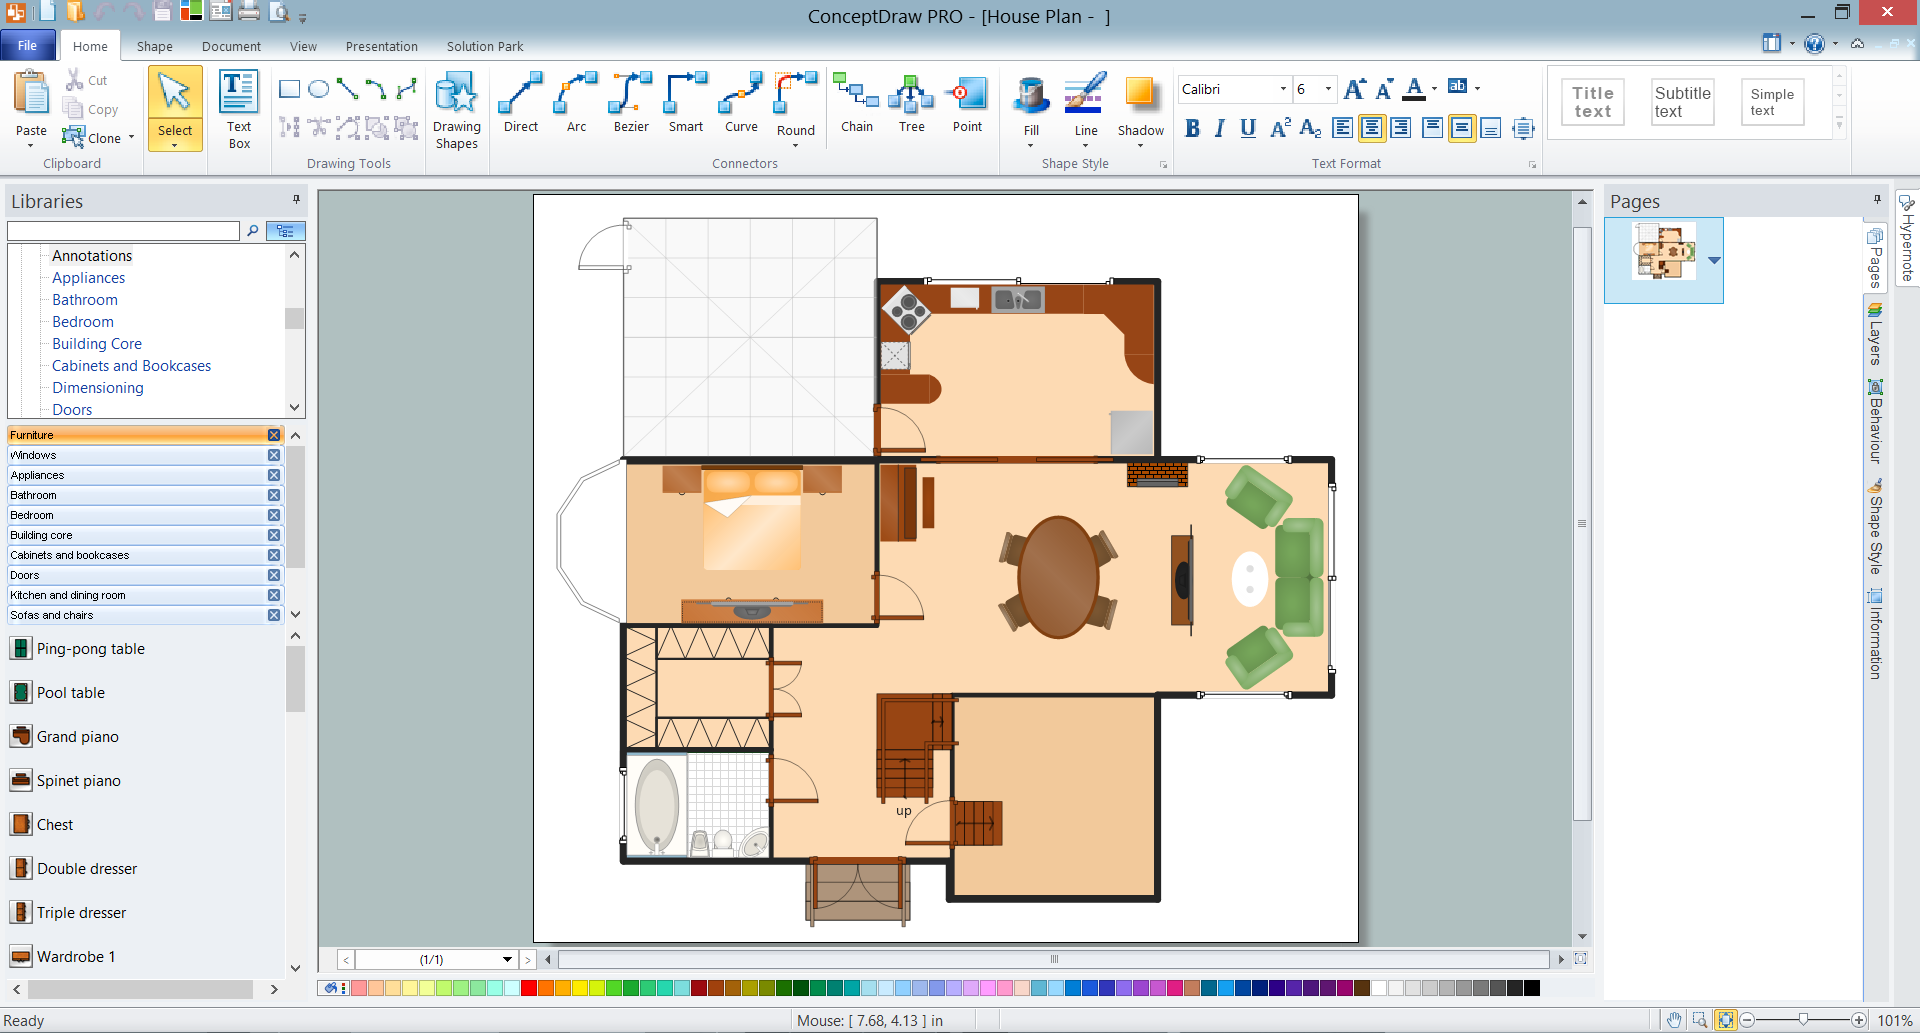 Home Plan in ConceptDraw DIAGRAM for PC